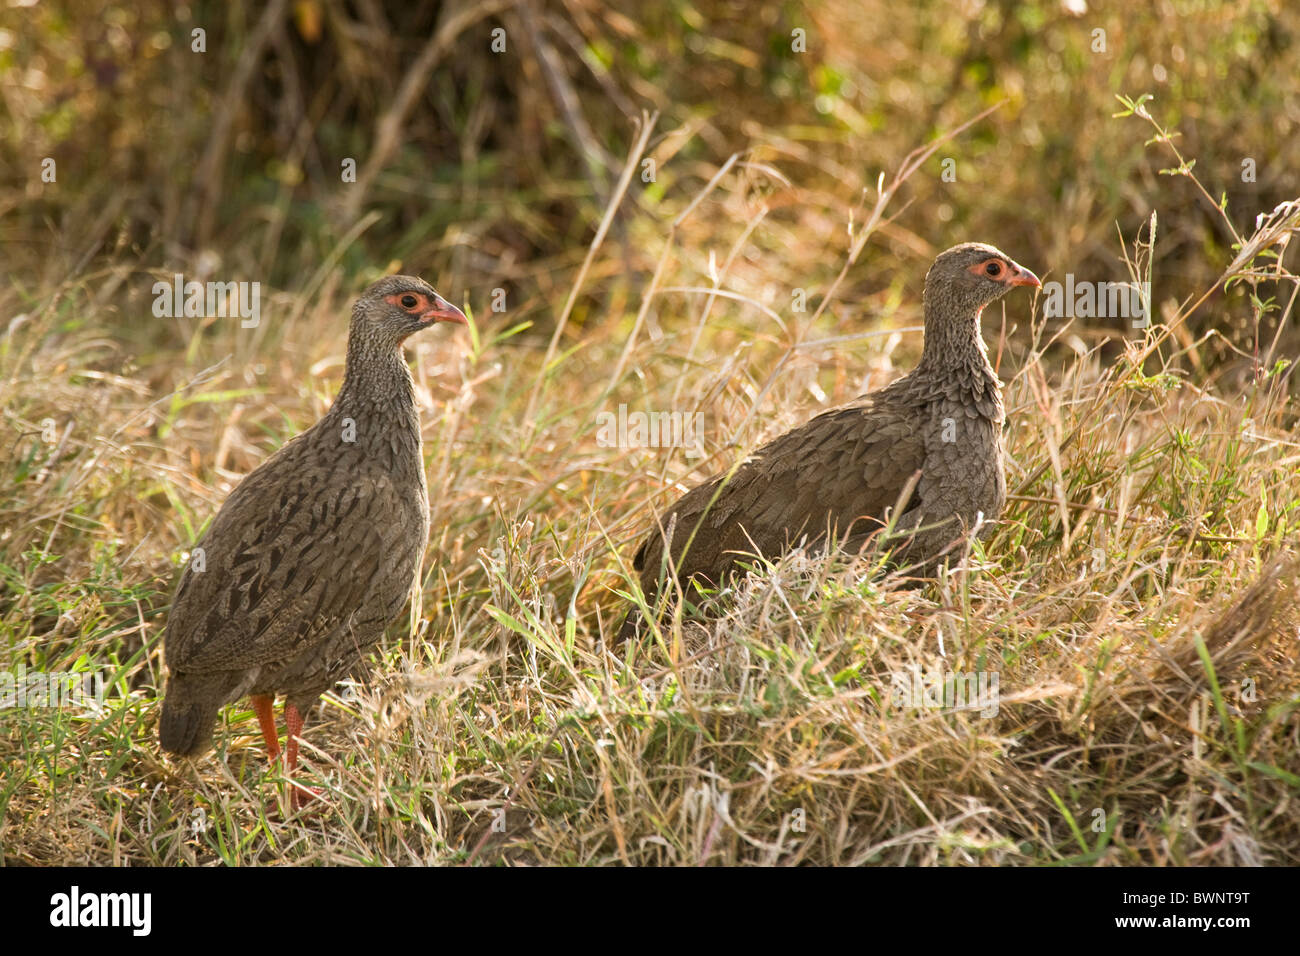 Red-necked Francolin (Francolinus afer) otherwise known as Red-necked Spurfowl, Masai Mara, Kenya Stock Photo